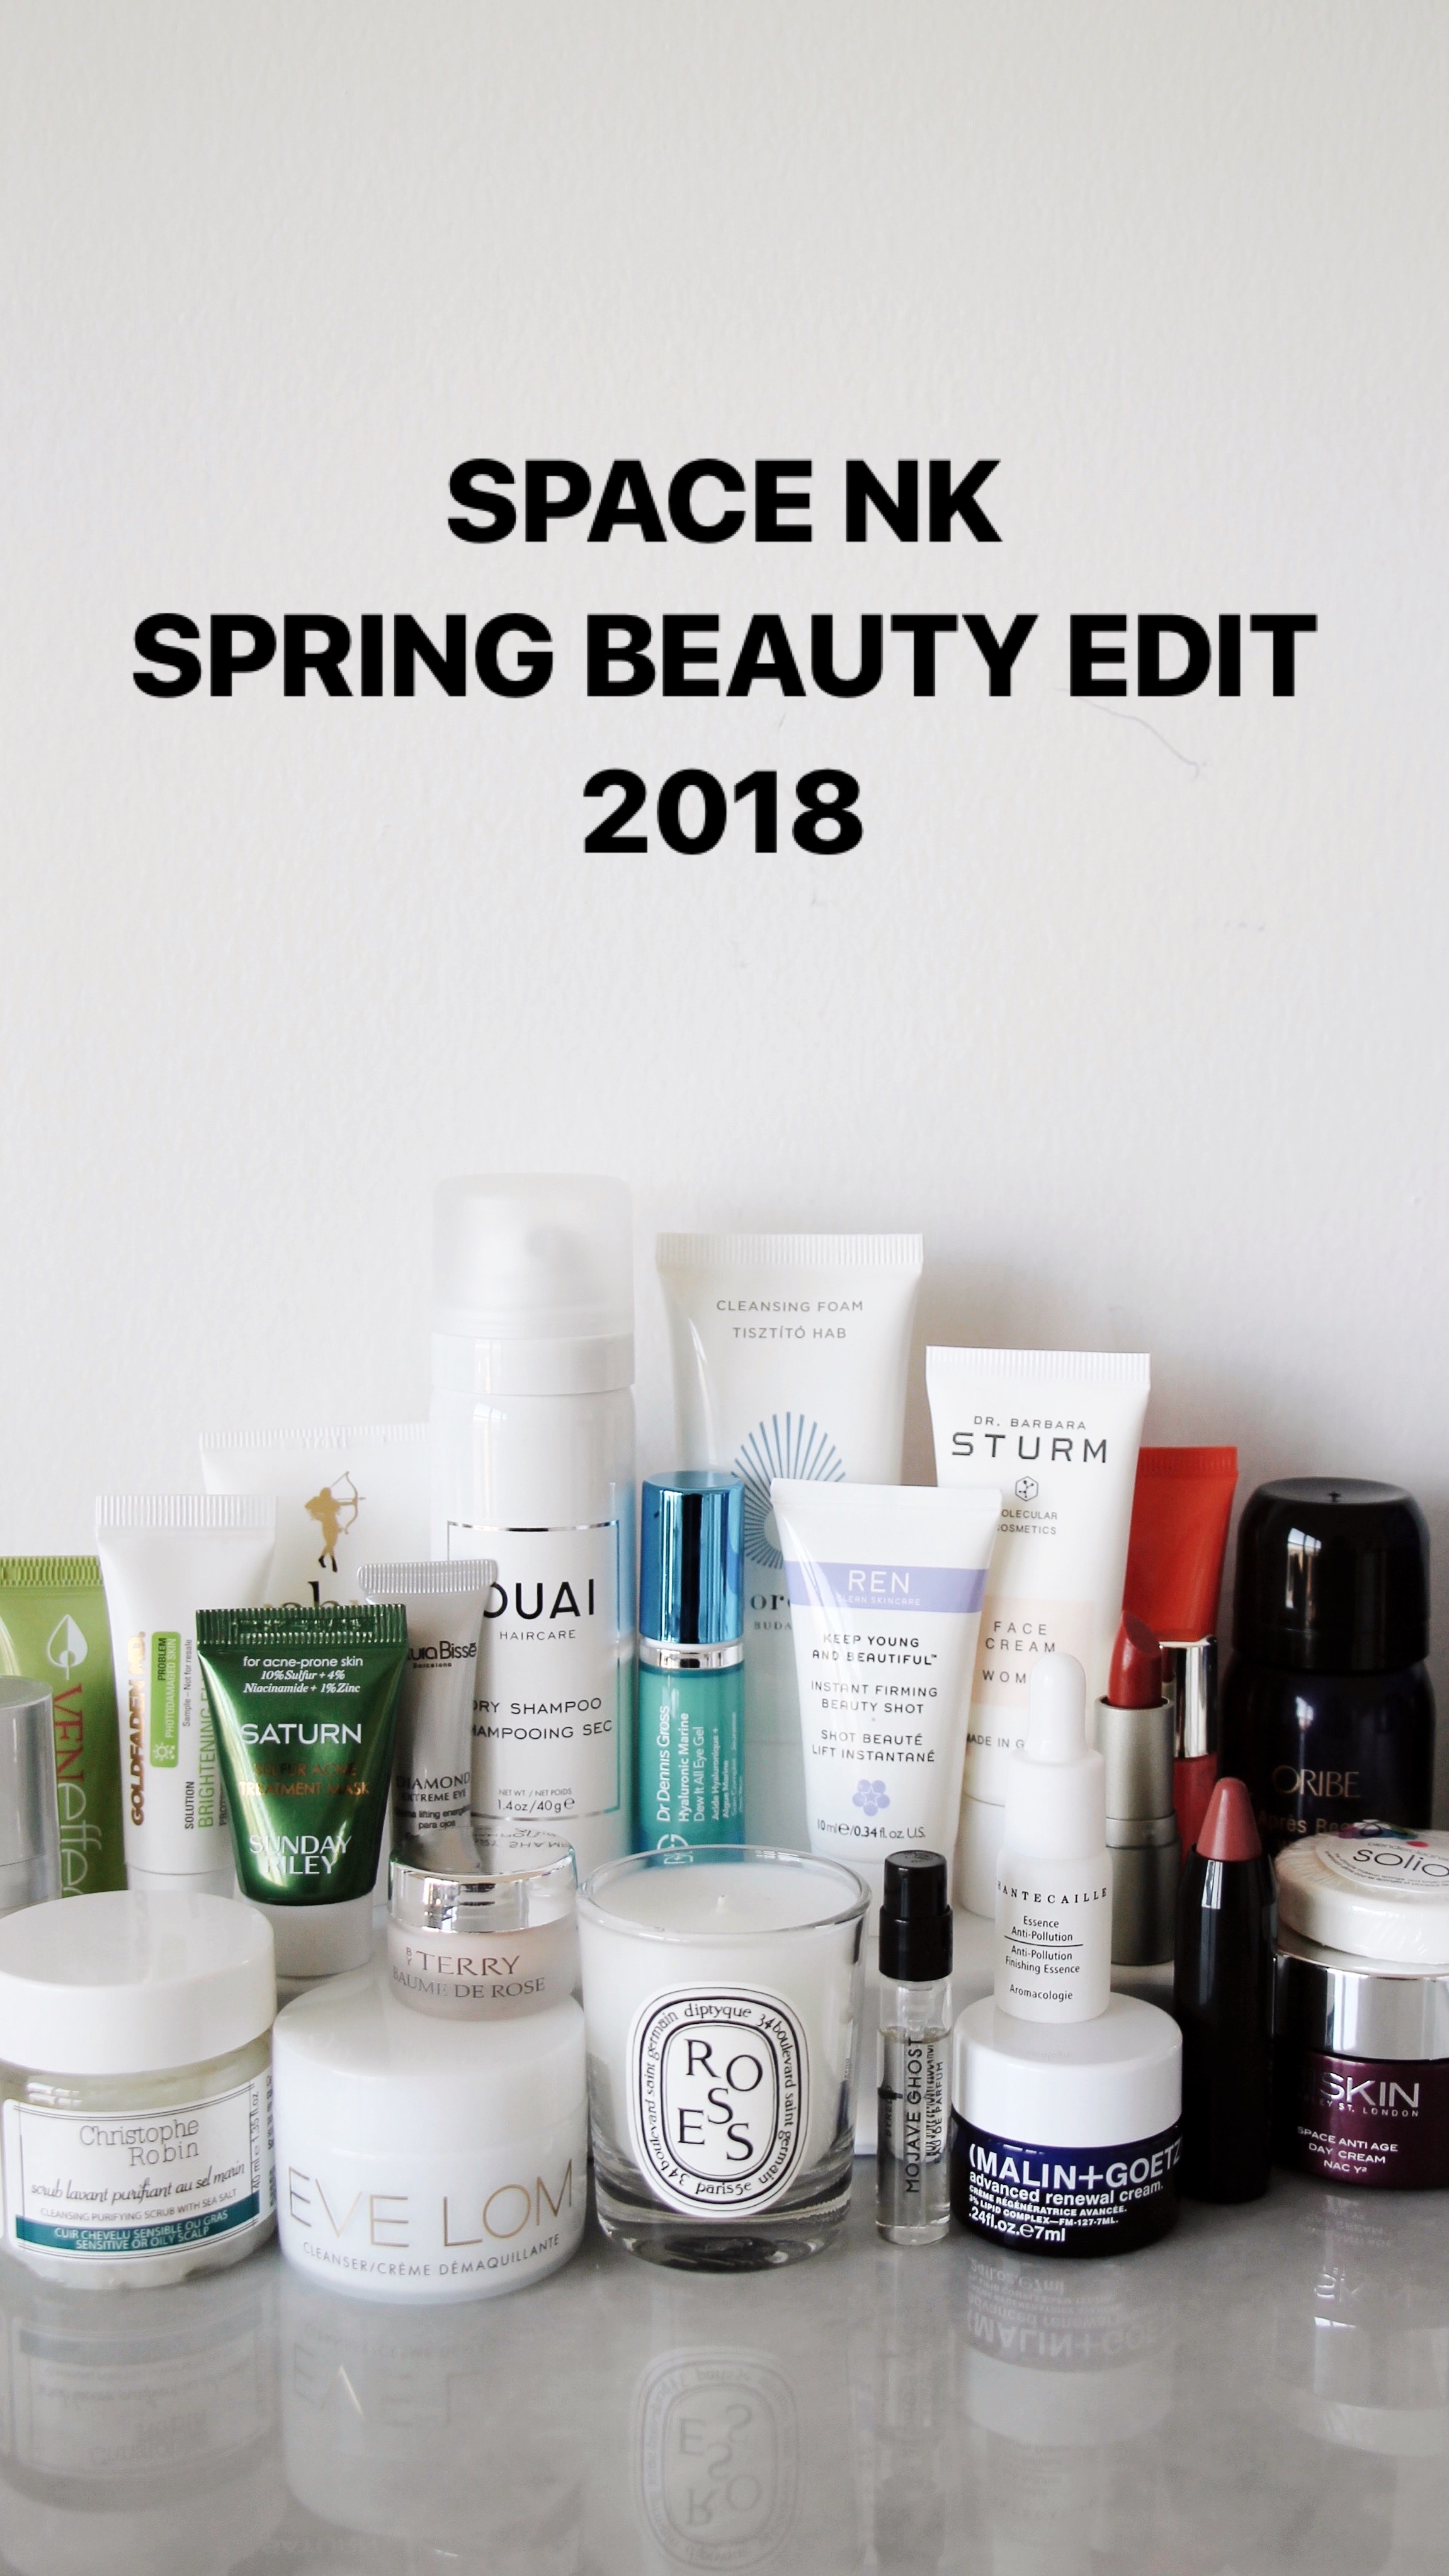 Space NK Spring Beauty Edit Gift With Purchase